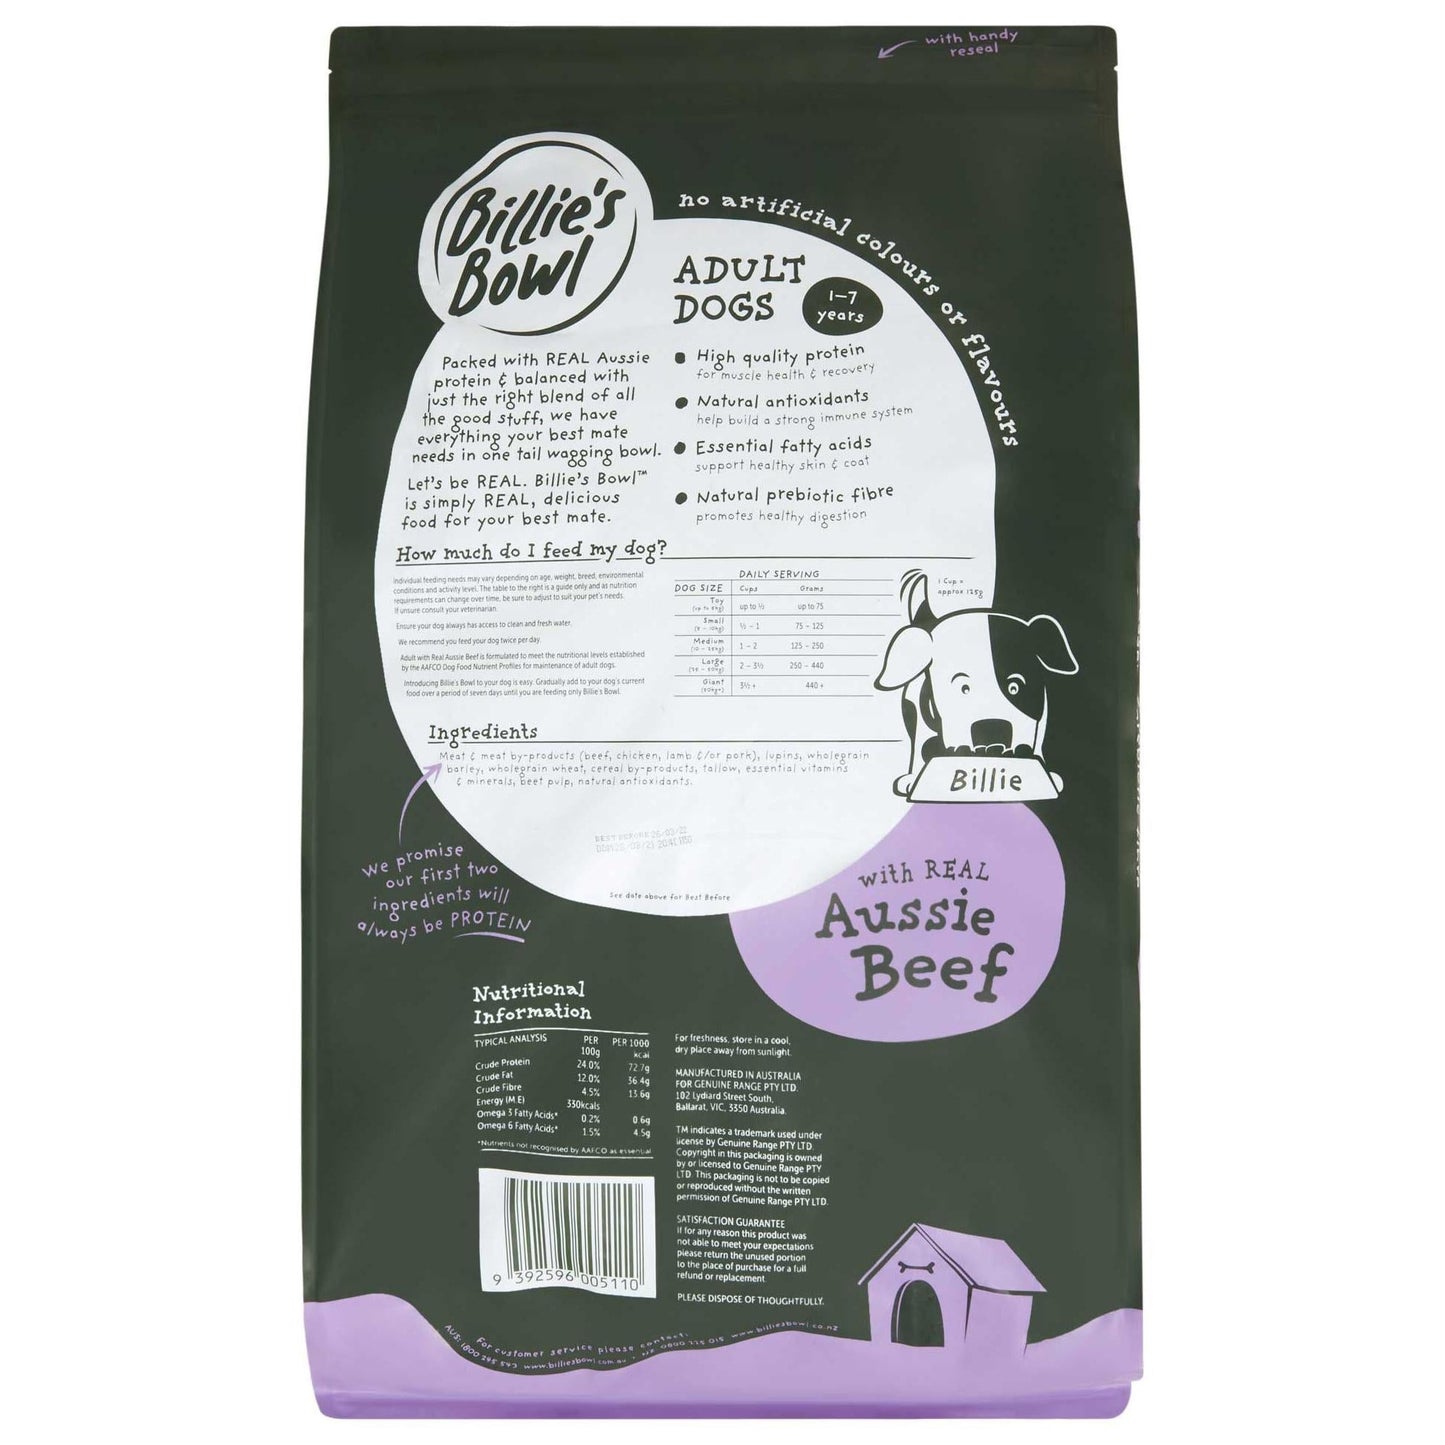 Billie's Bowl Adult with REAL Aussie Beef Dry Dog Food 10kg